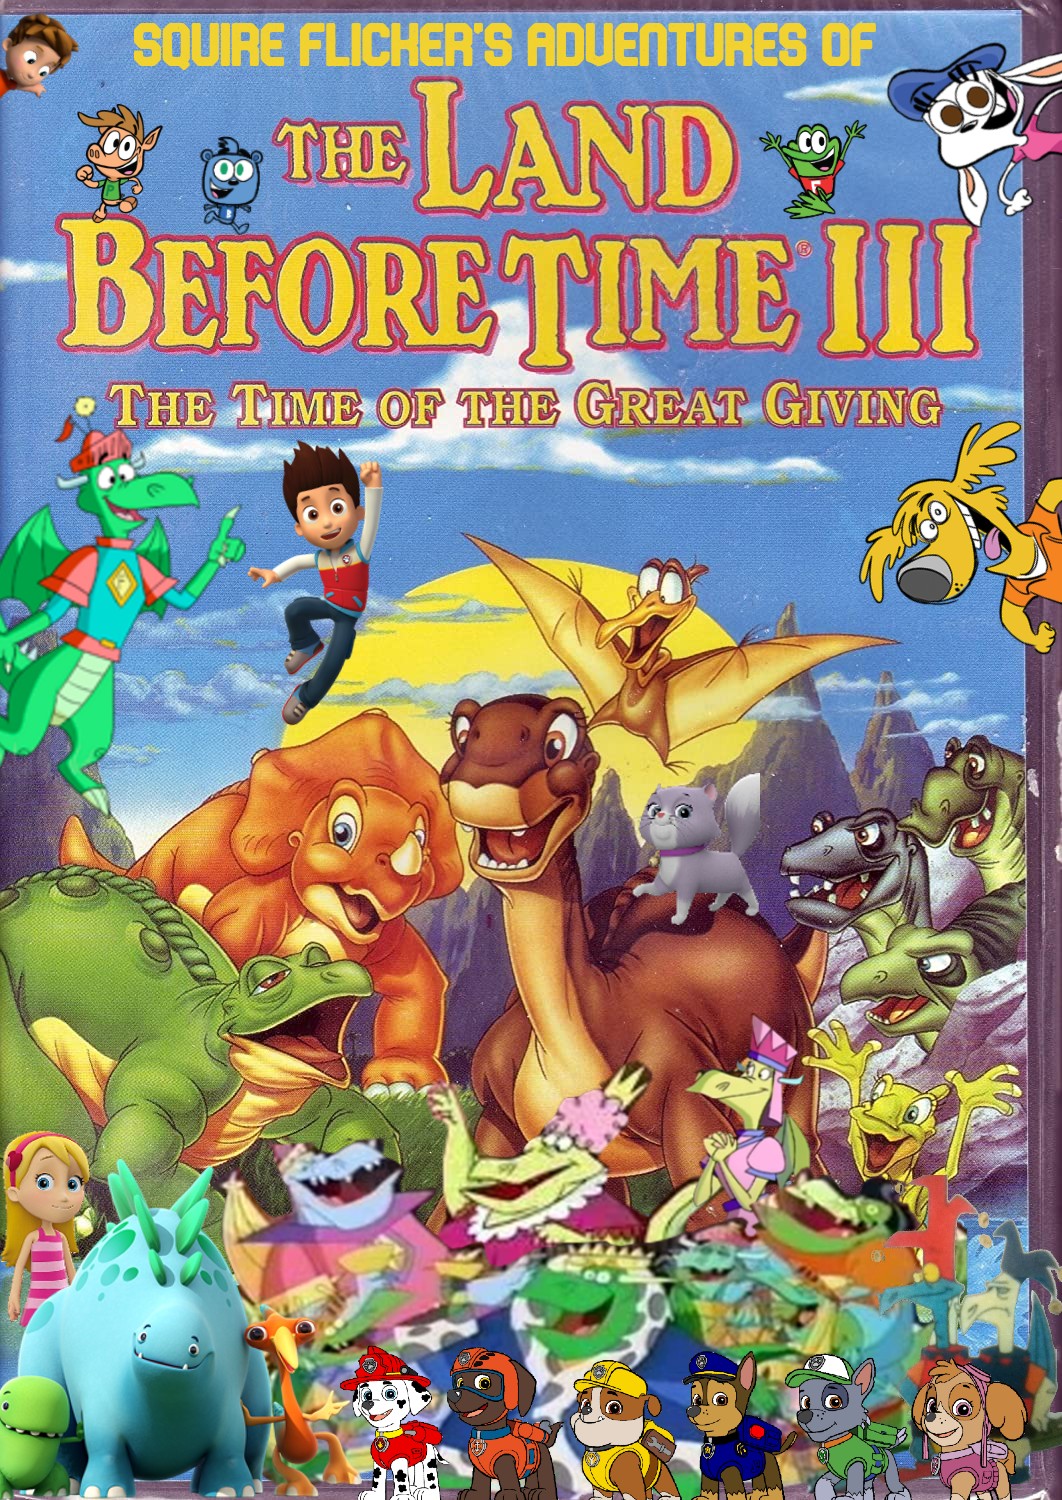 Squire Flicker's Adventures of The Land Before Time III: The Time of the  Great Giving, Pooh's Adventures Wiki